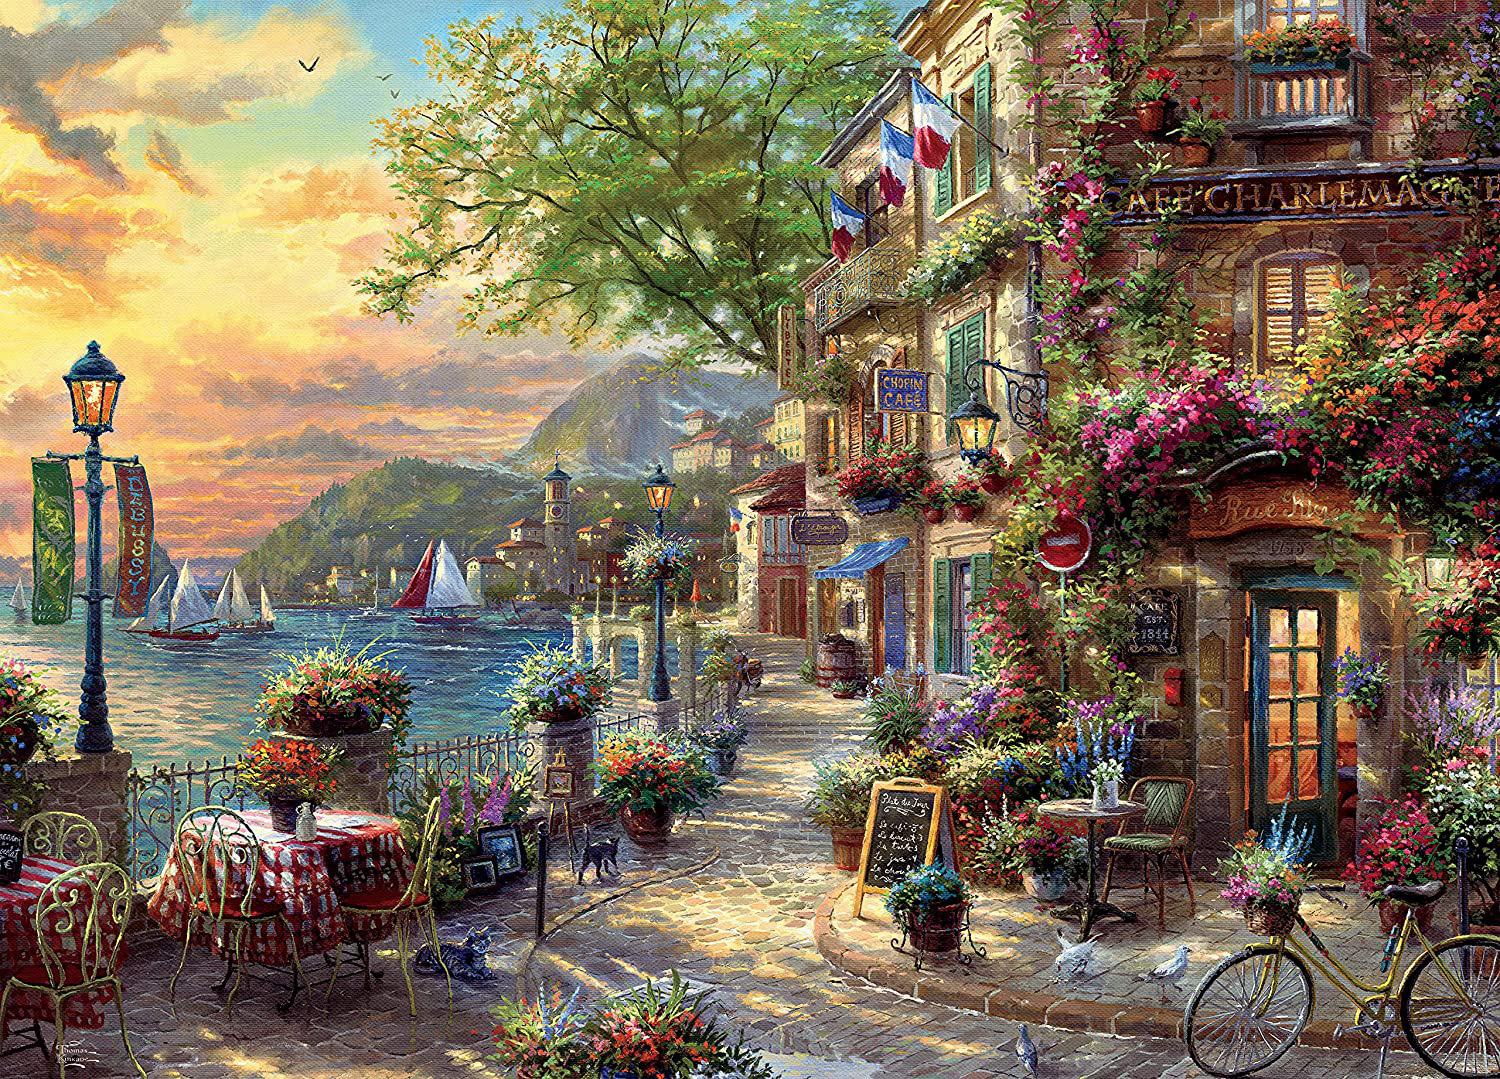 The French Riviera Cafe Paris & France Jigsaw Puzzle